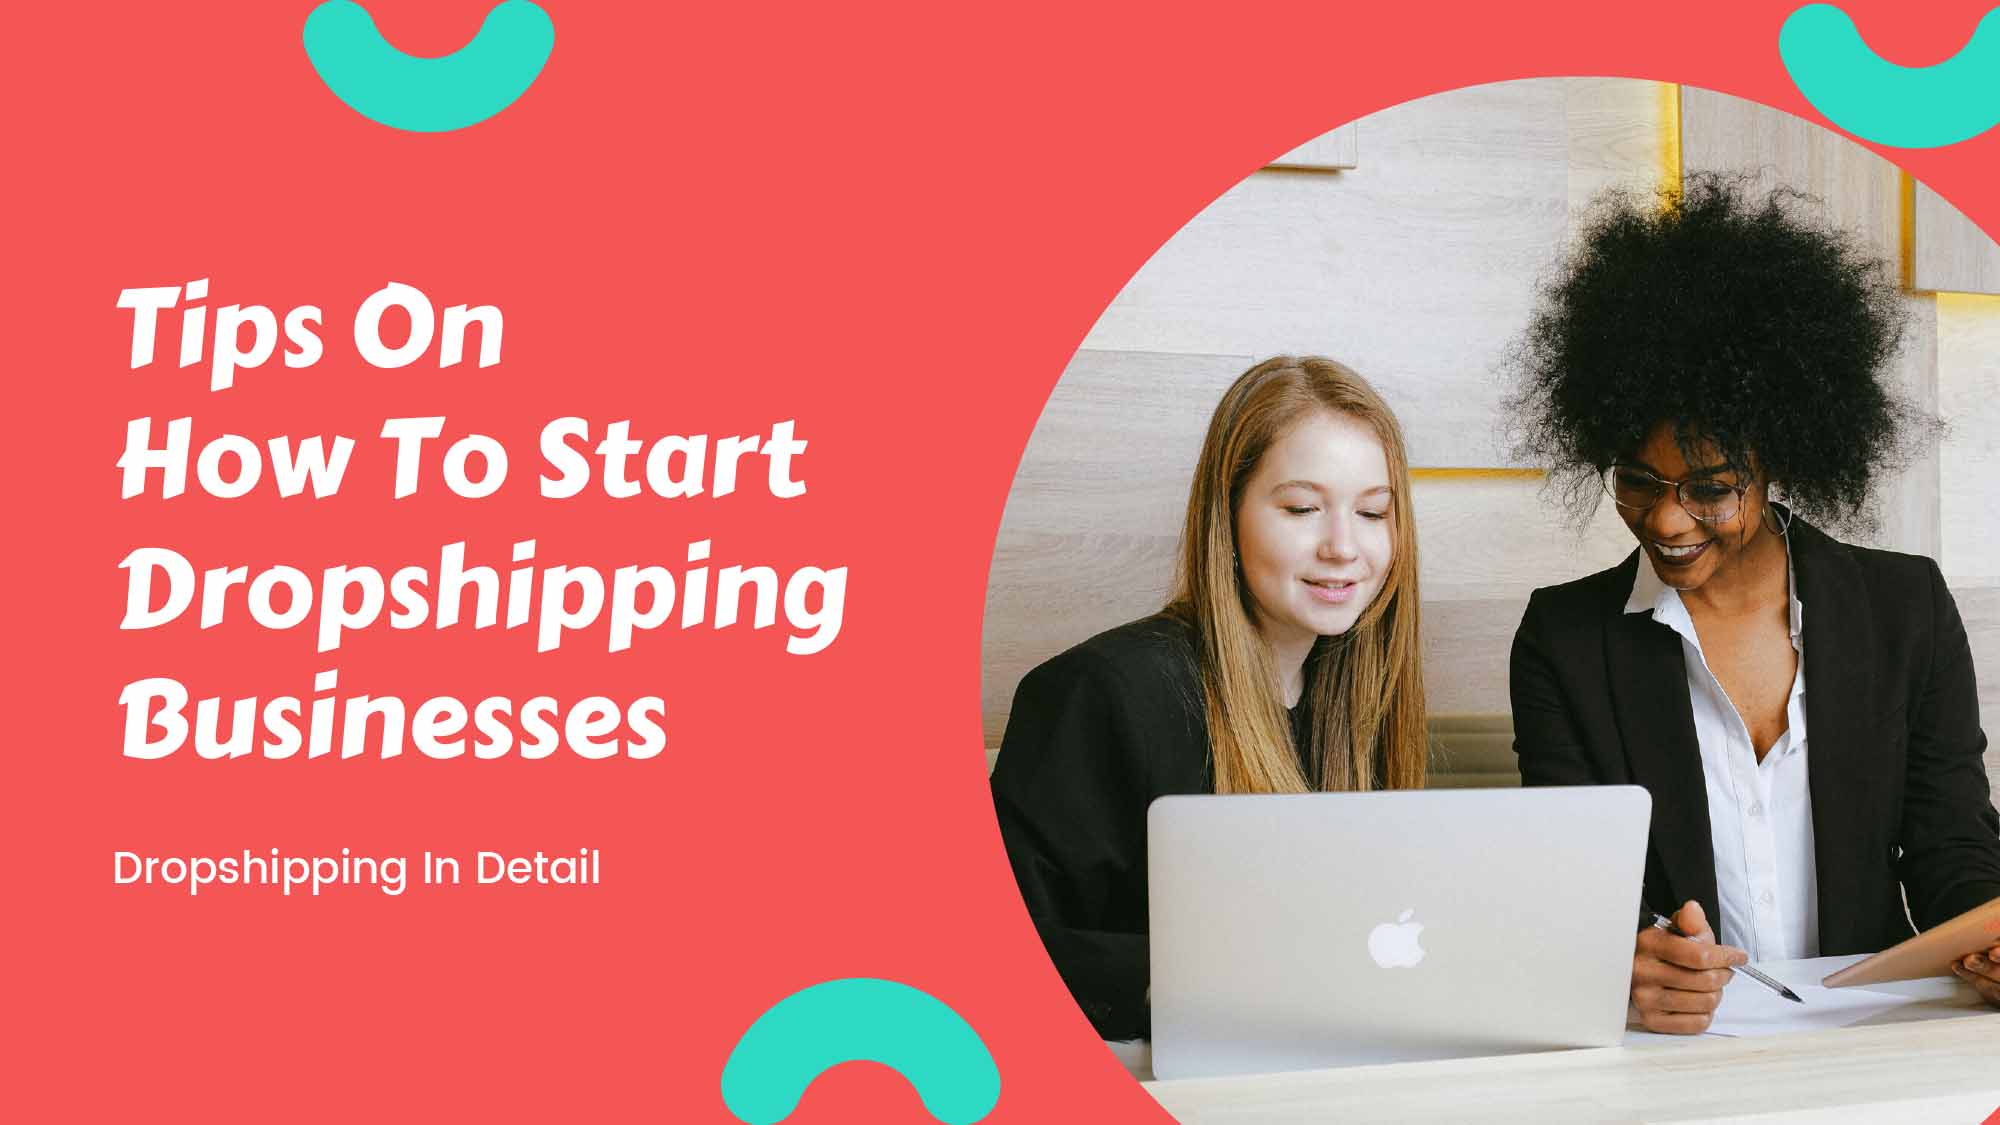 Dropshipping In Detail: How To Get Started With Dropshipping Businesses